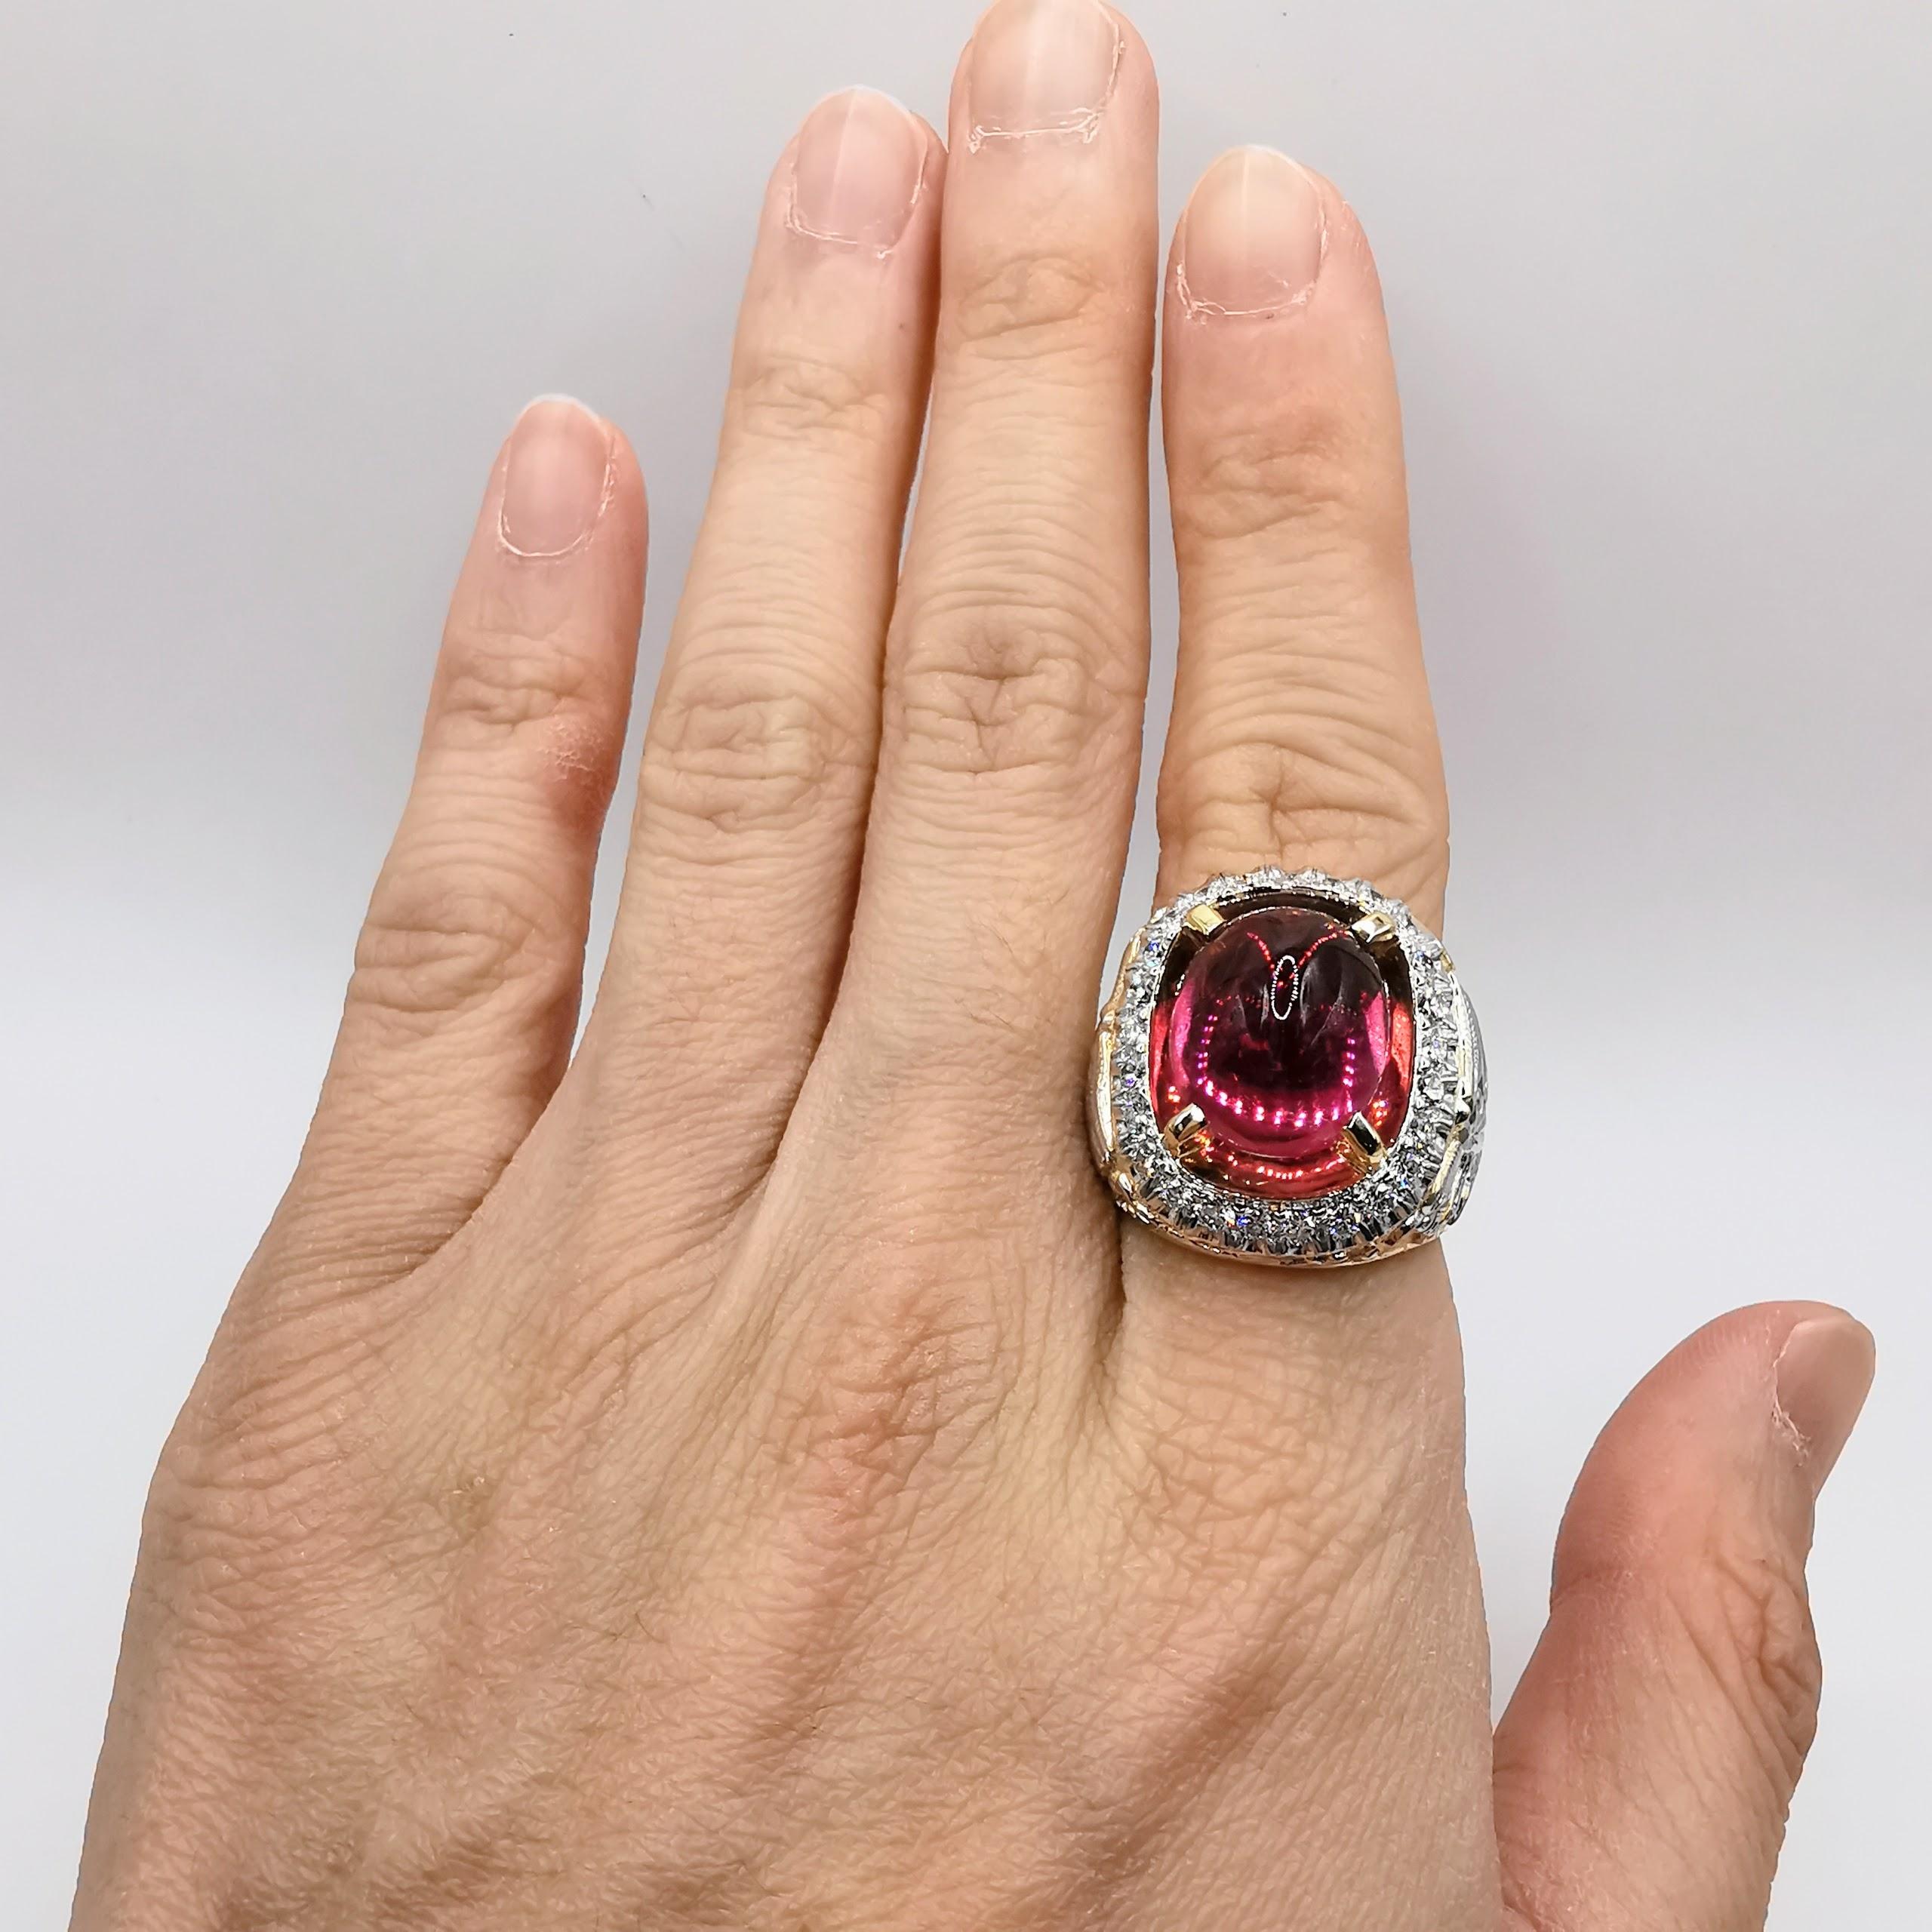 Vintage Dragon 10.2ct Cabochon Pink Tourmaline Diamond Men's Ring in 18K Gold For Sale 5